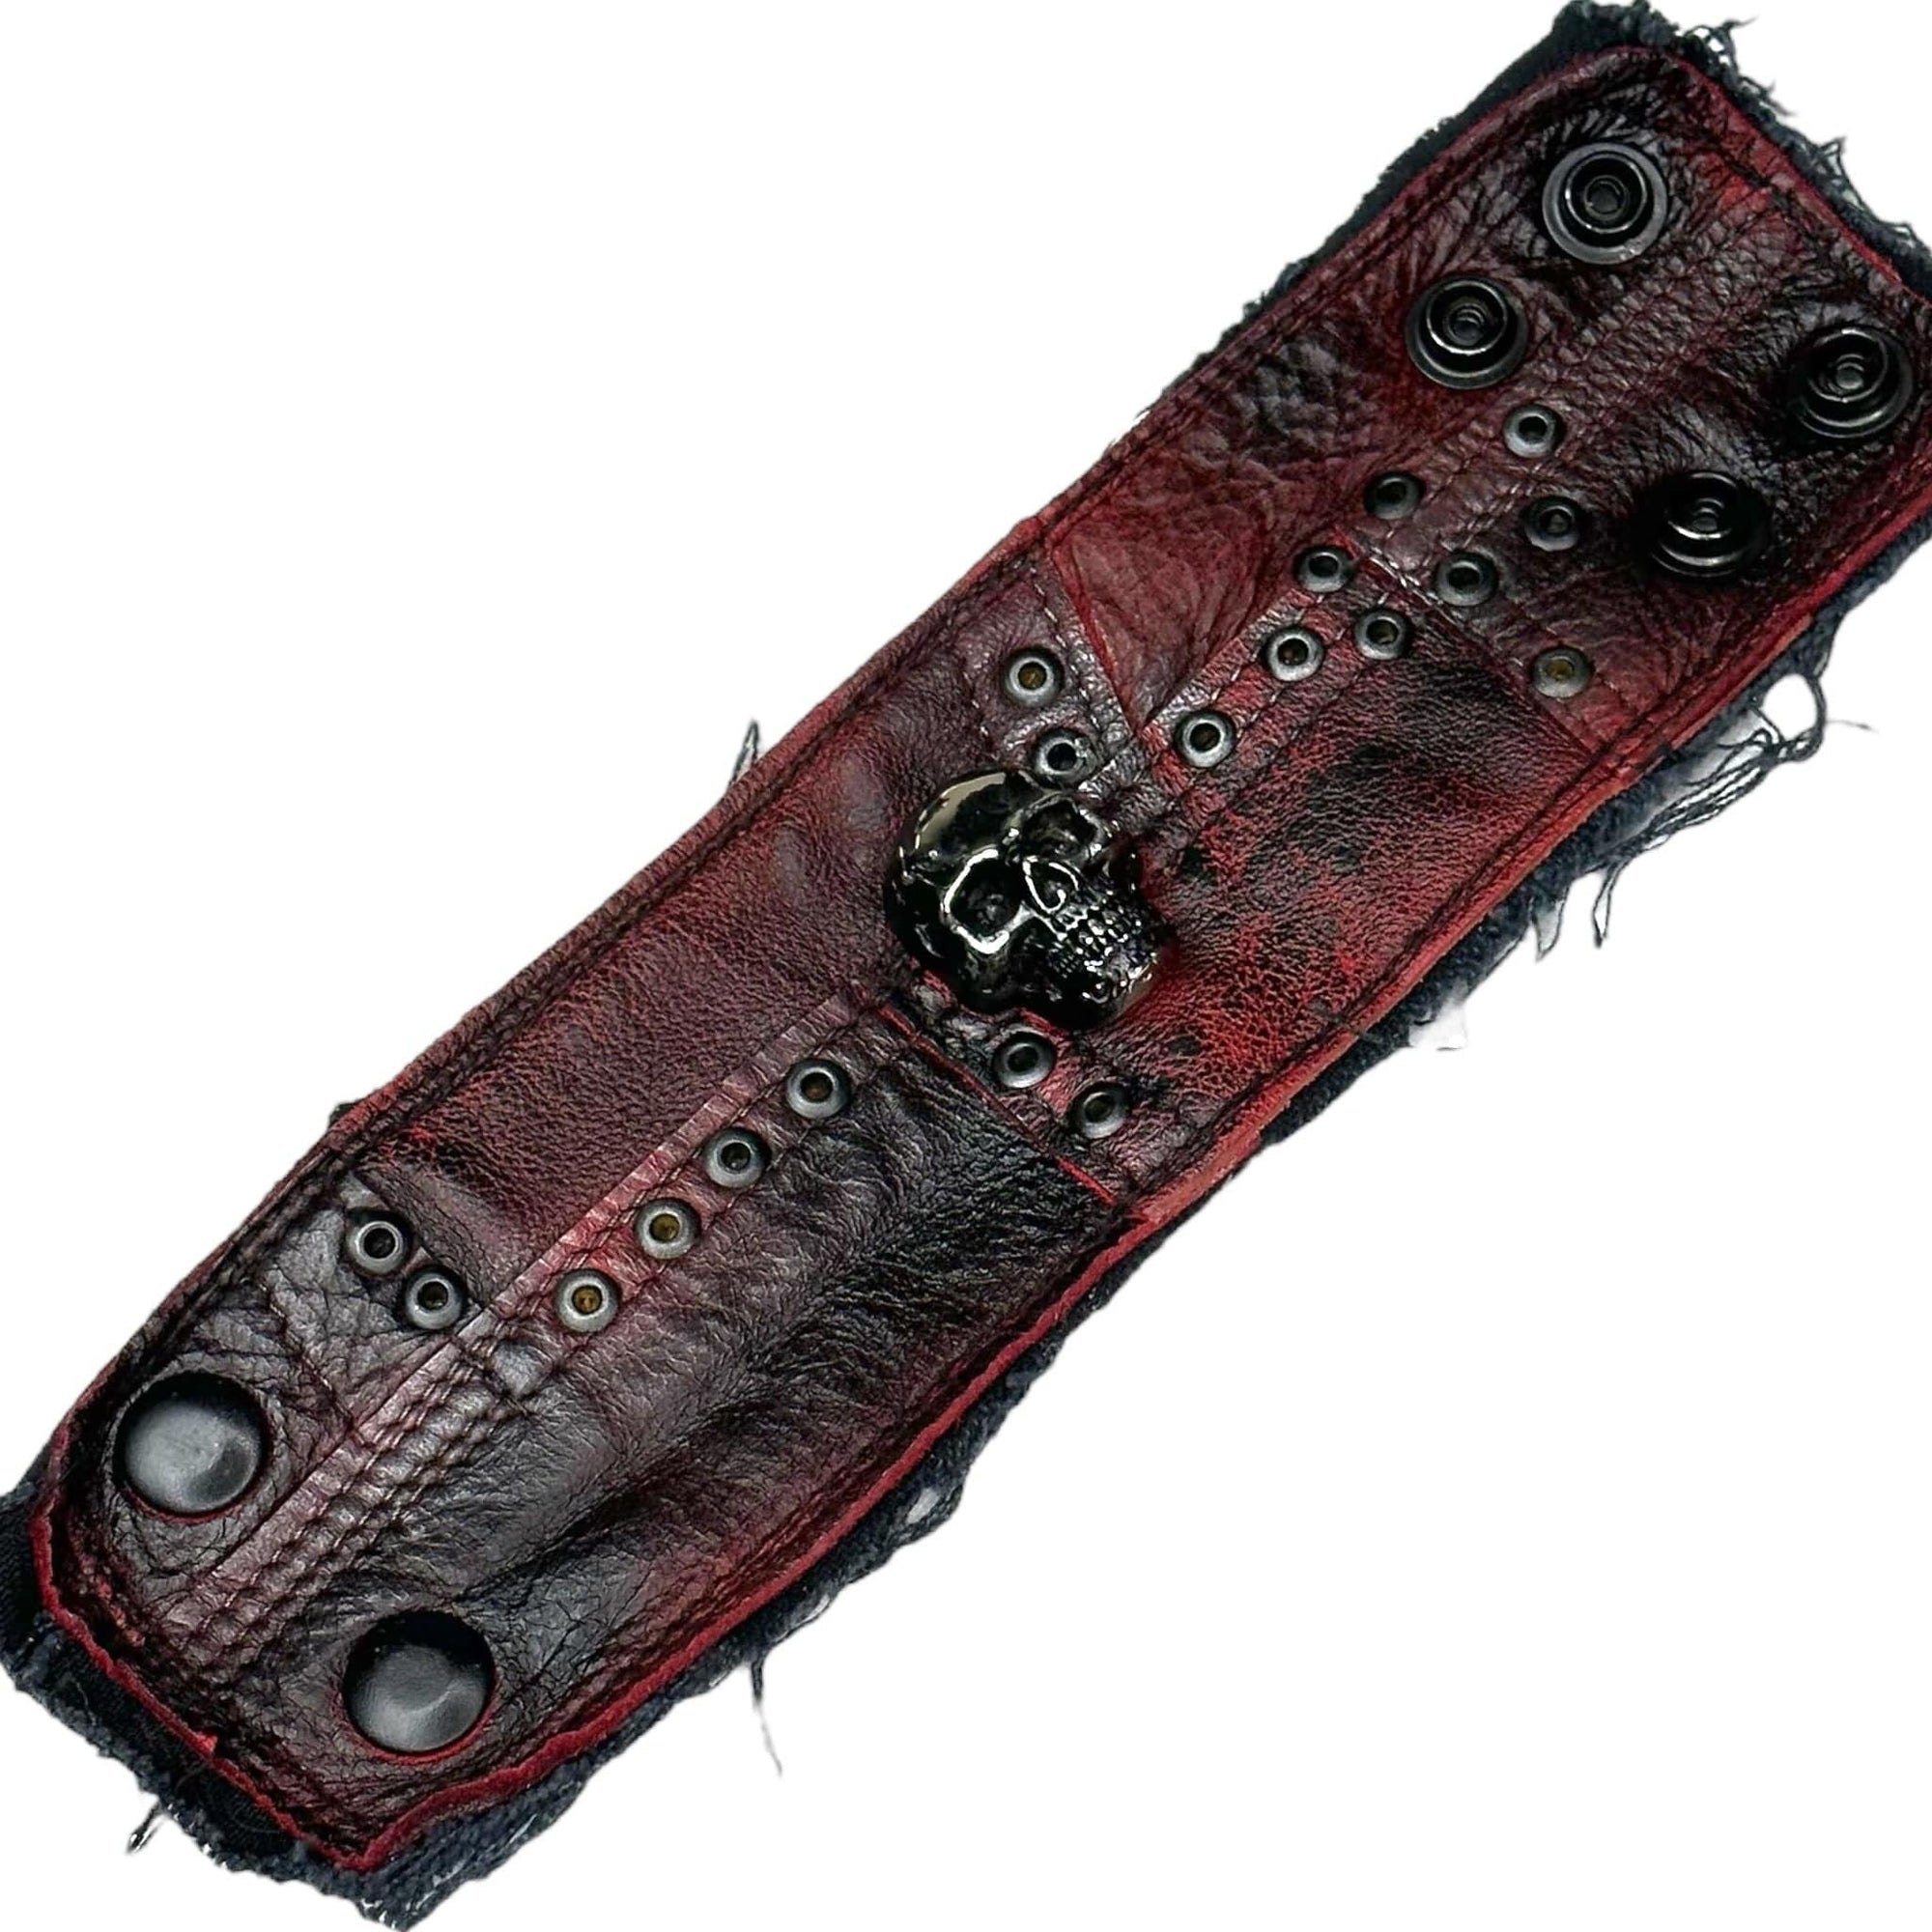 • Wornstar Custom Salvaged Collection• Ready to ship - Custom leather wrist band• One of a kind• Designed, made, and sold exclusively by Wornstar Clothing• Completely hand-made• Individually made; each one will vary slightly• Made with soft leather• Lined for comfort• Hand-made detail with metal, skull accent• 